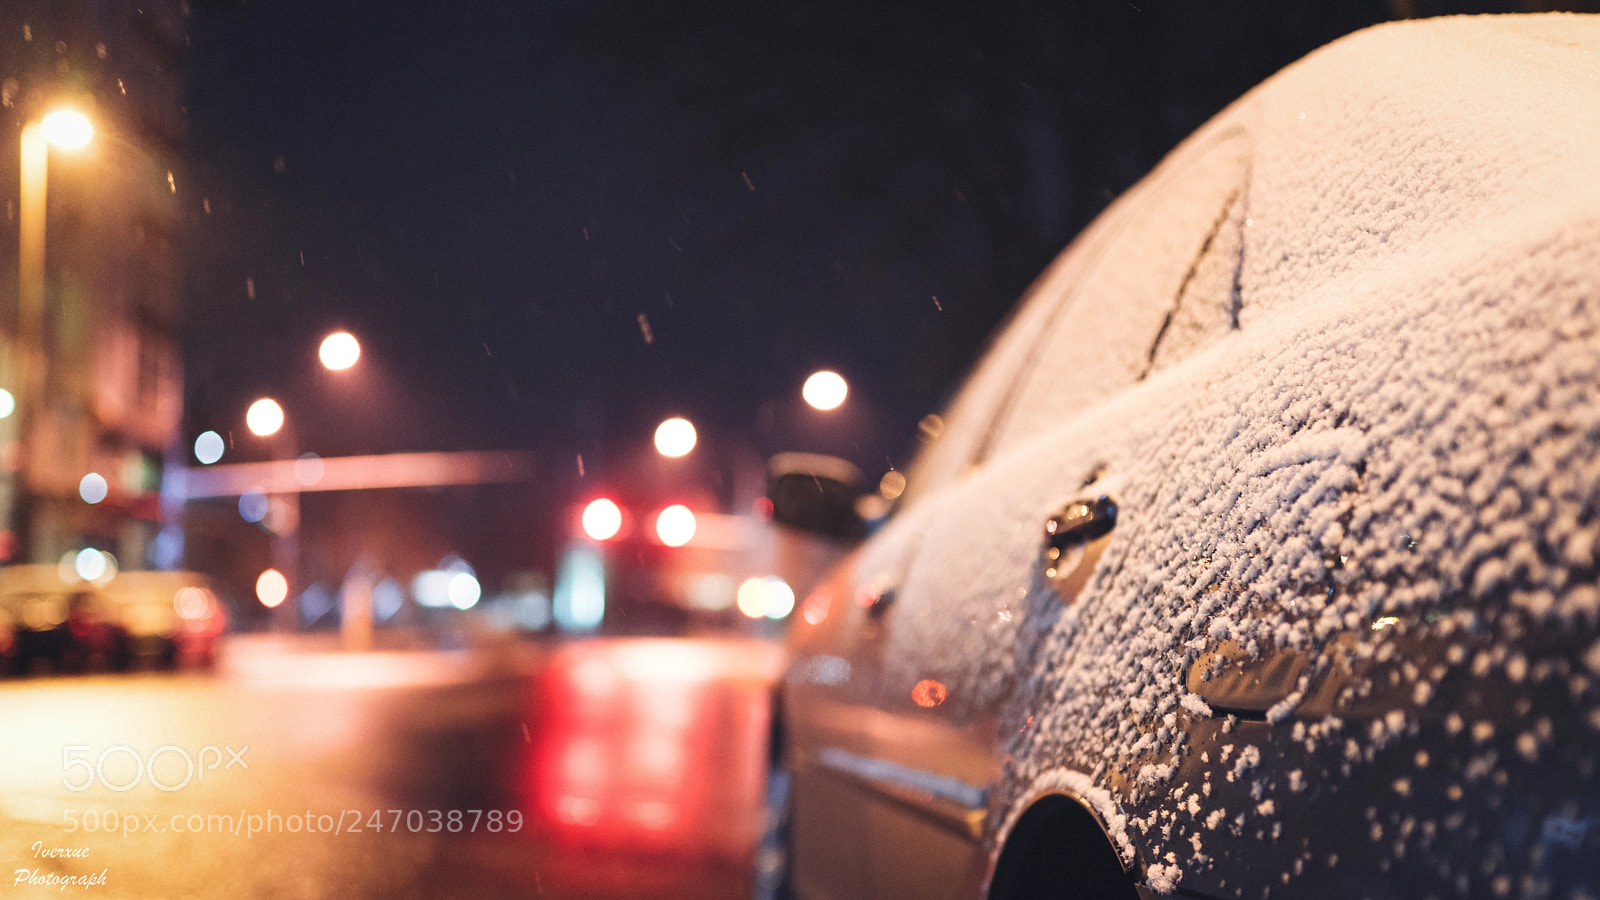 Sony a7R II sample photo. Snowing photography